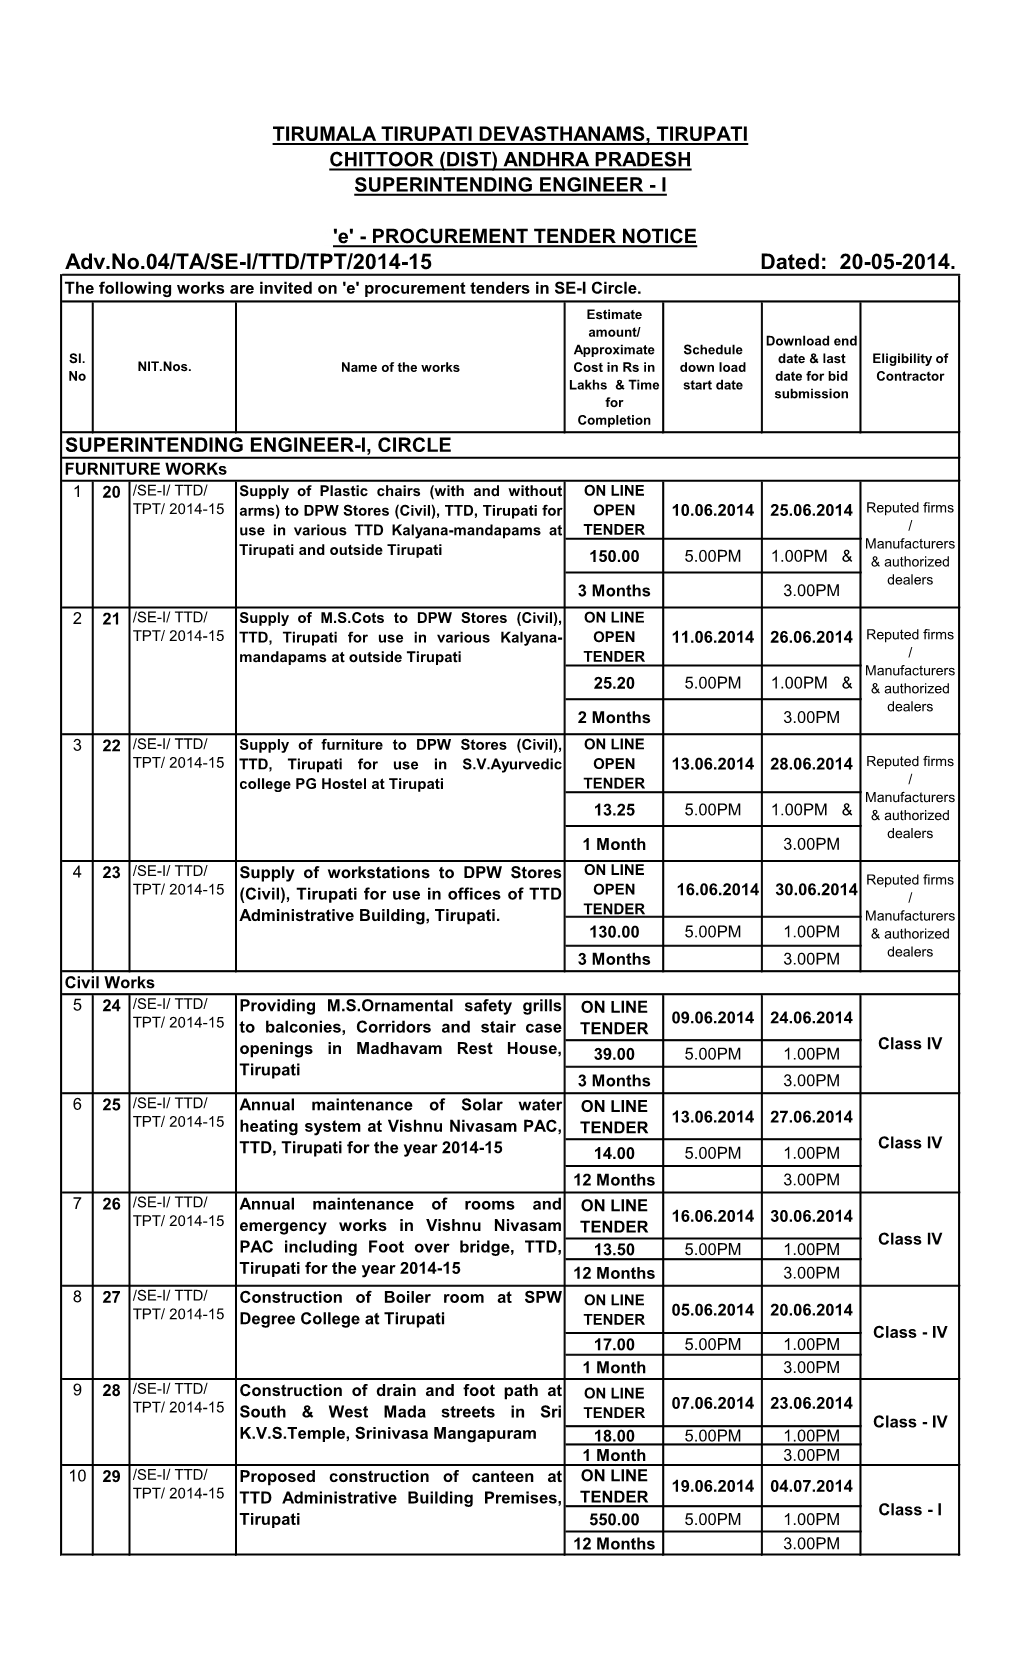 Adv.No.04/TA/SE-I/TTD/TPT/2014-15 Dated: 20-05-2014. the Following Works Are Invited on 'E' Procurement Tenders in SE-I Circle